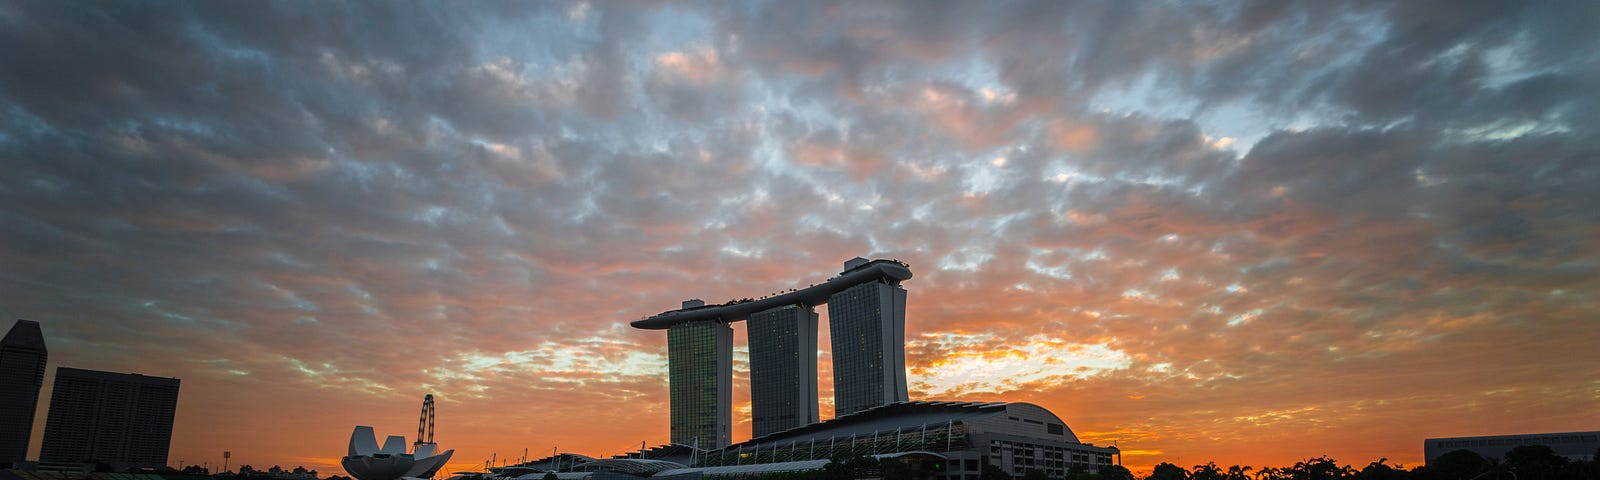 5 Best Sunset Views in Singapore